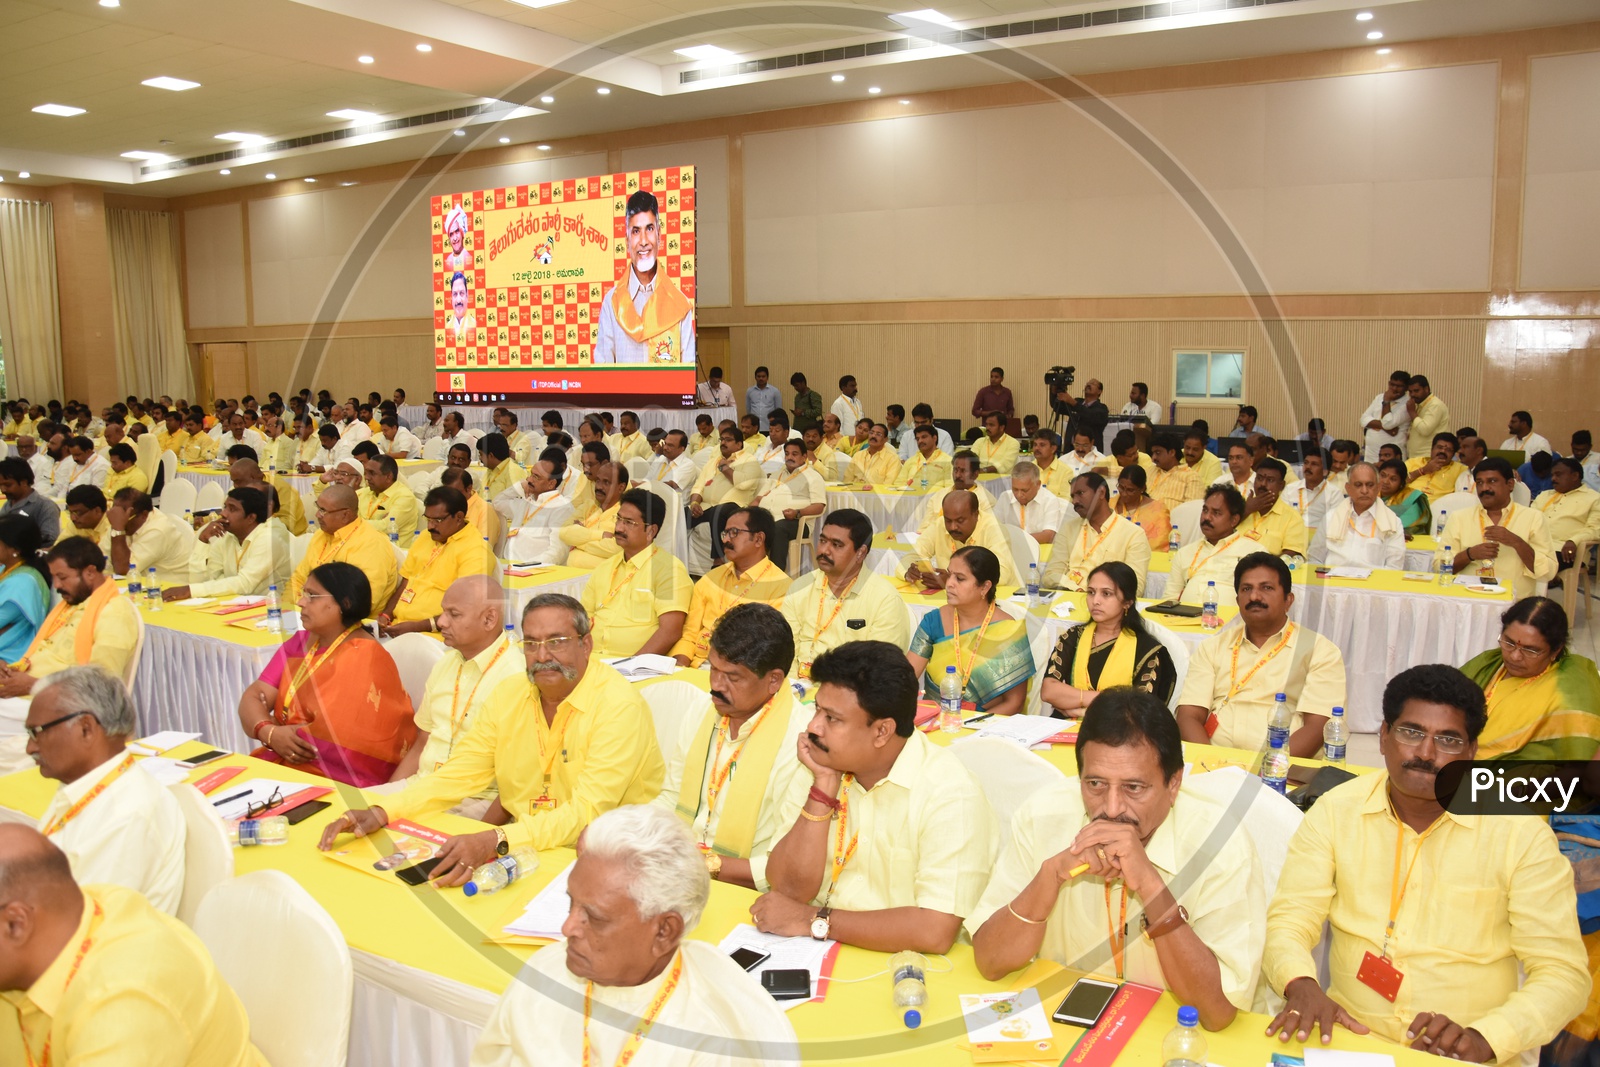 District wise Tdp leaders in undavalli grevence hall for state work shop